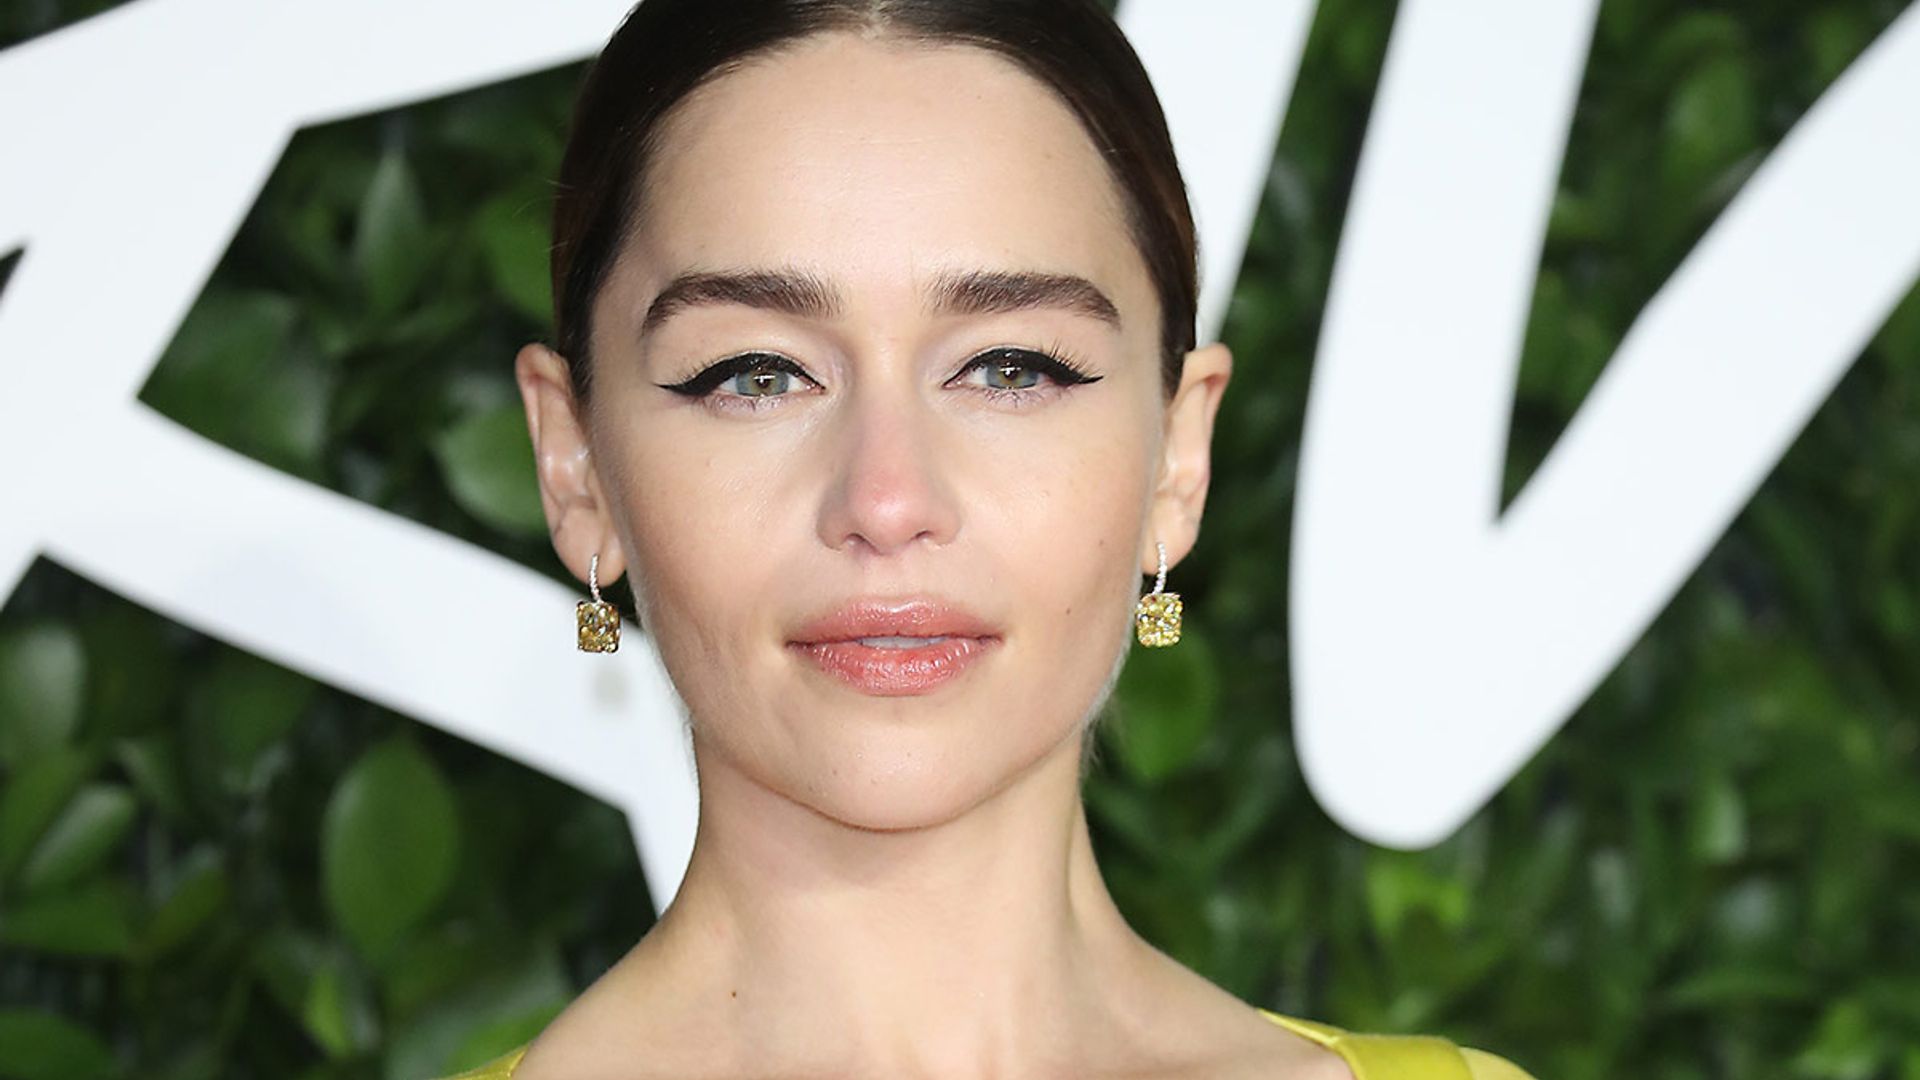 This is the moisturiser Emilia Clarke uses for glowing skin, and it's now on sale